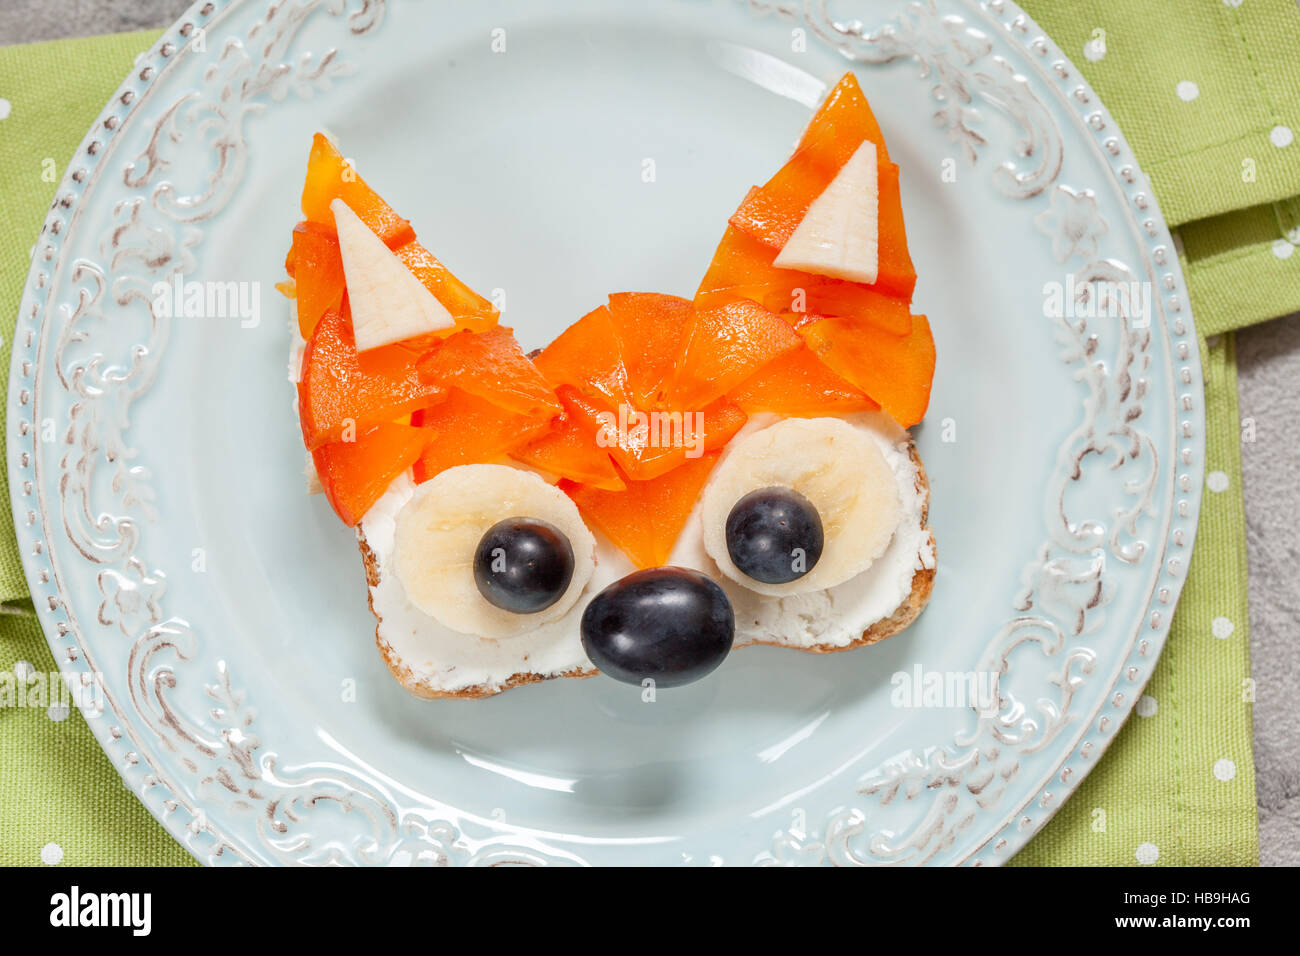 Kid's breakfast toast aux fruits Banque D'Images